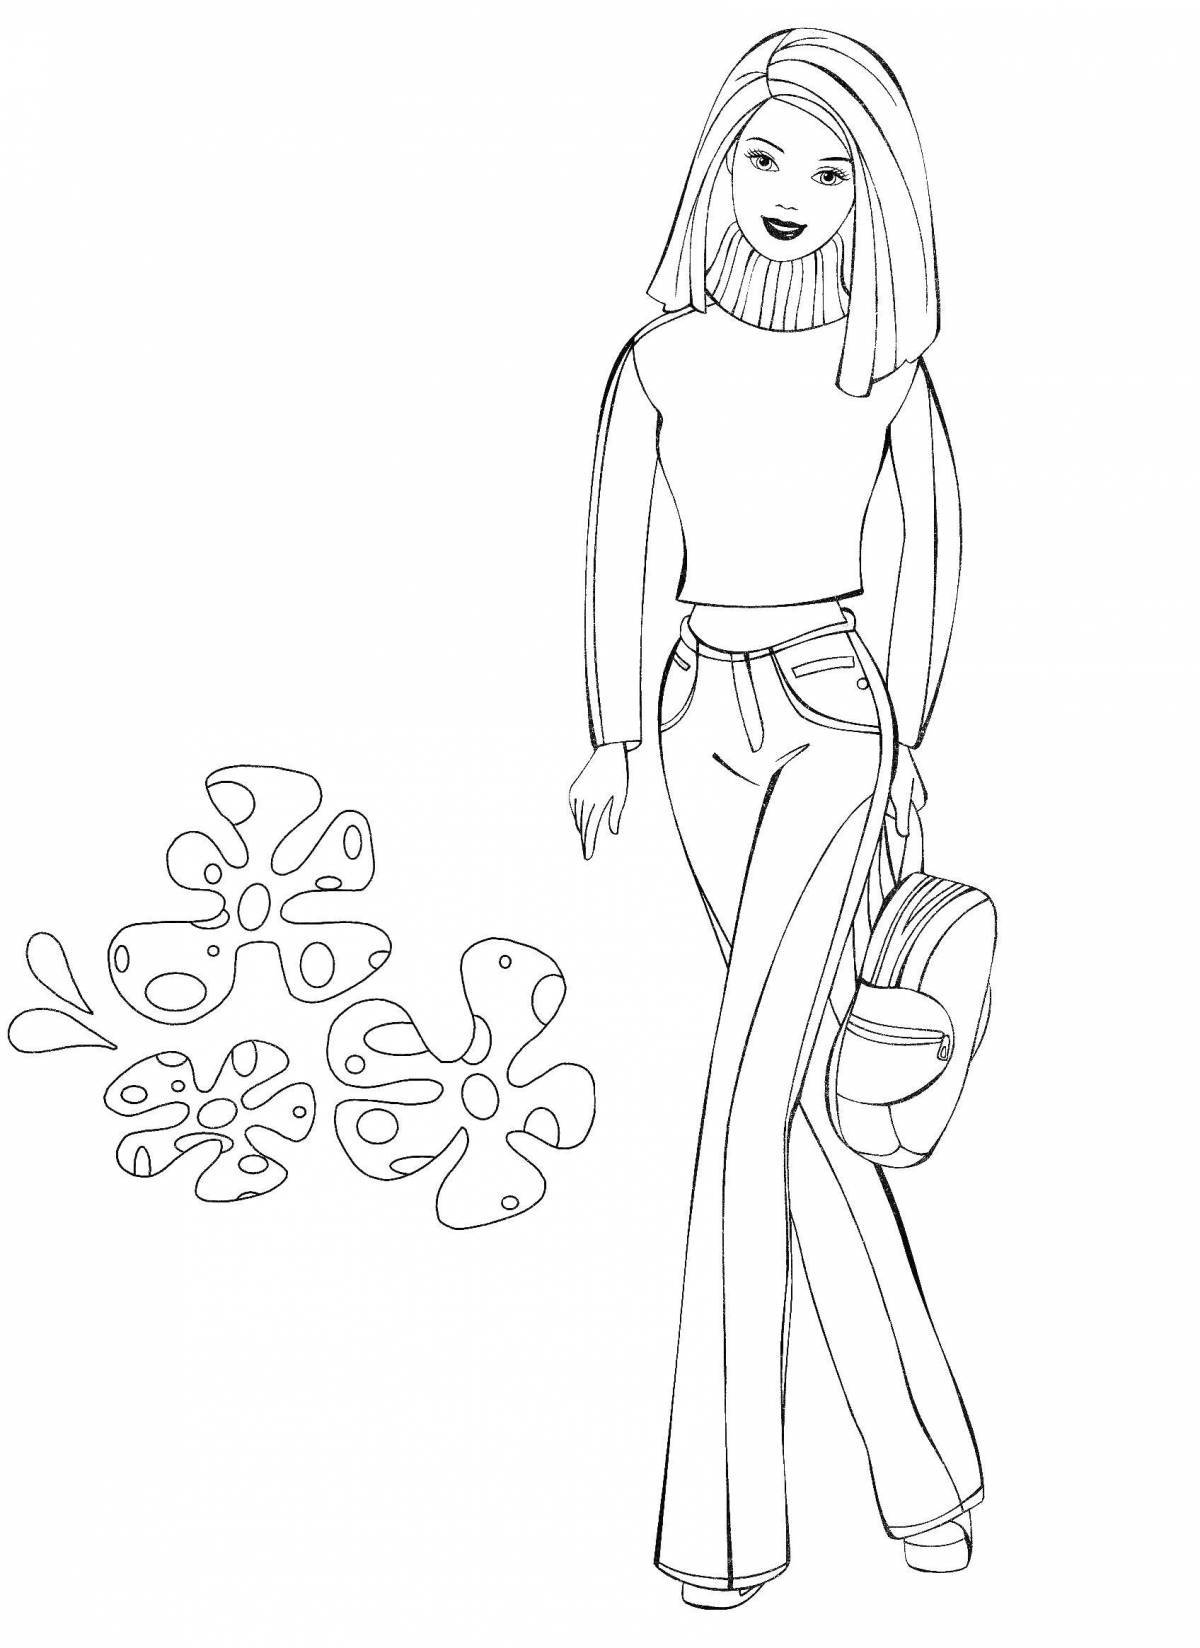 Exquisite barbie doll coloring page